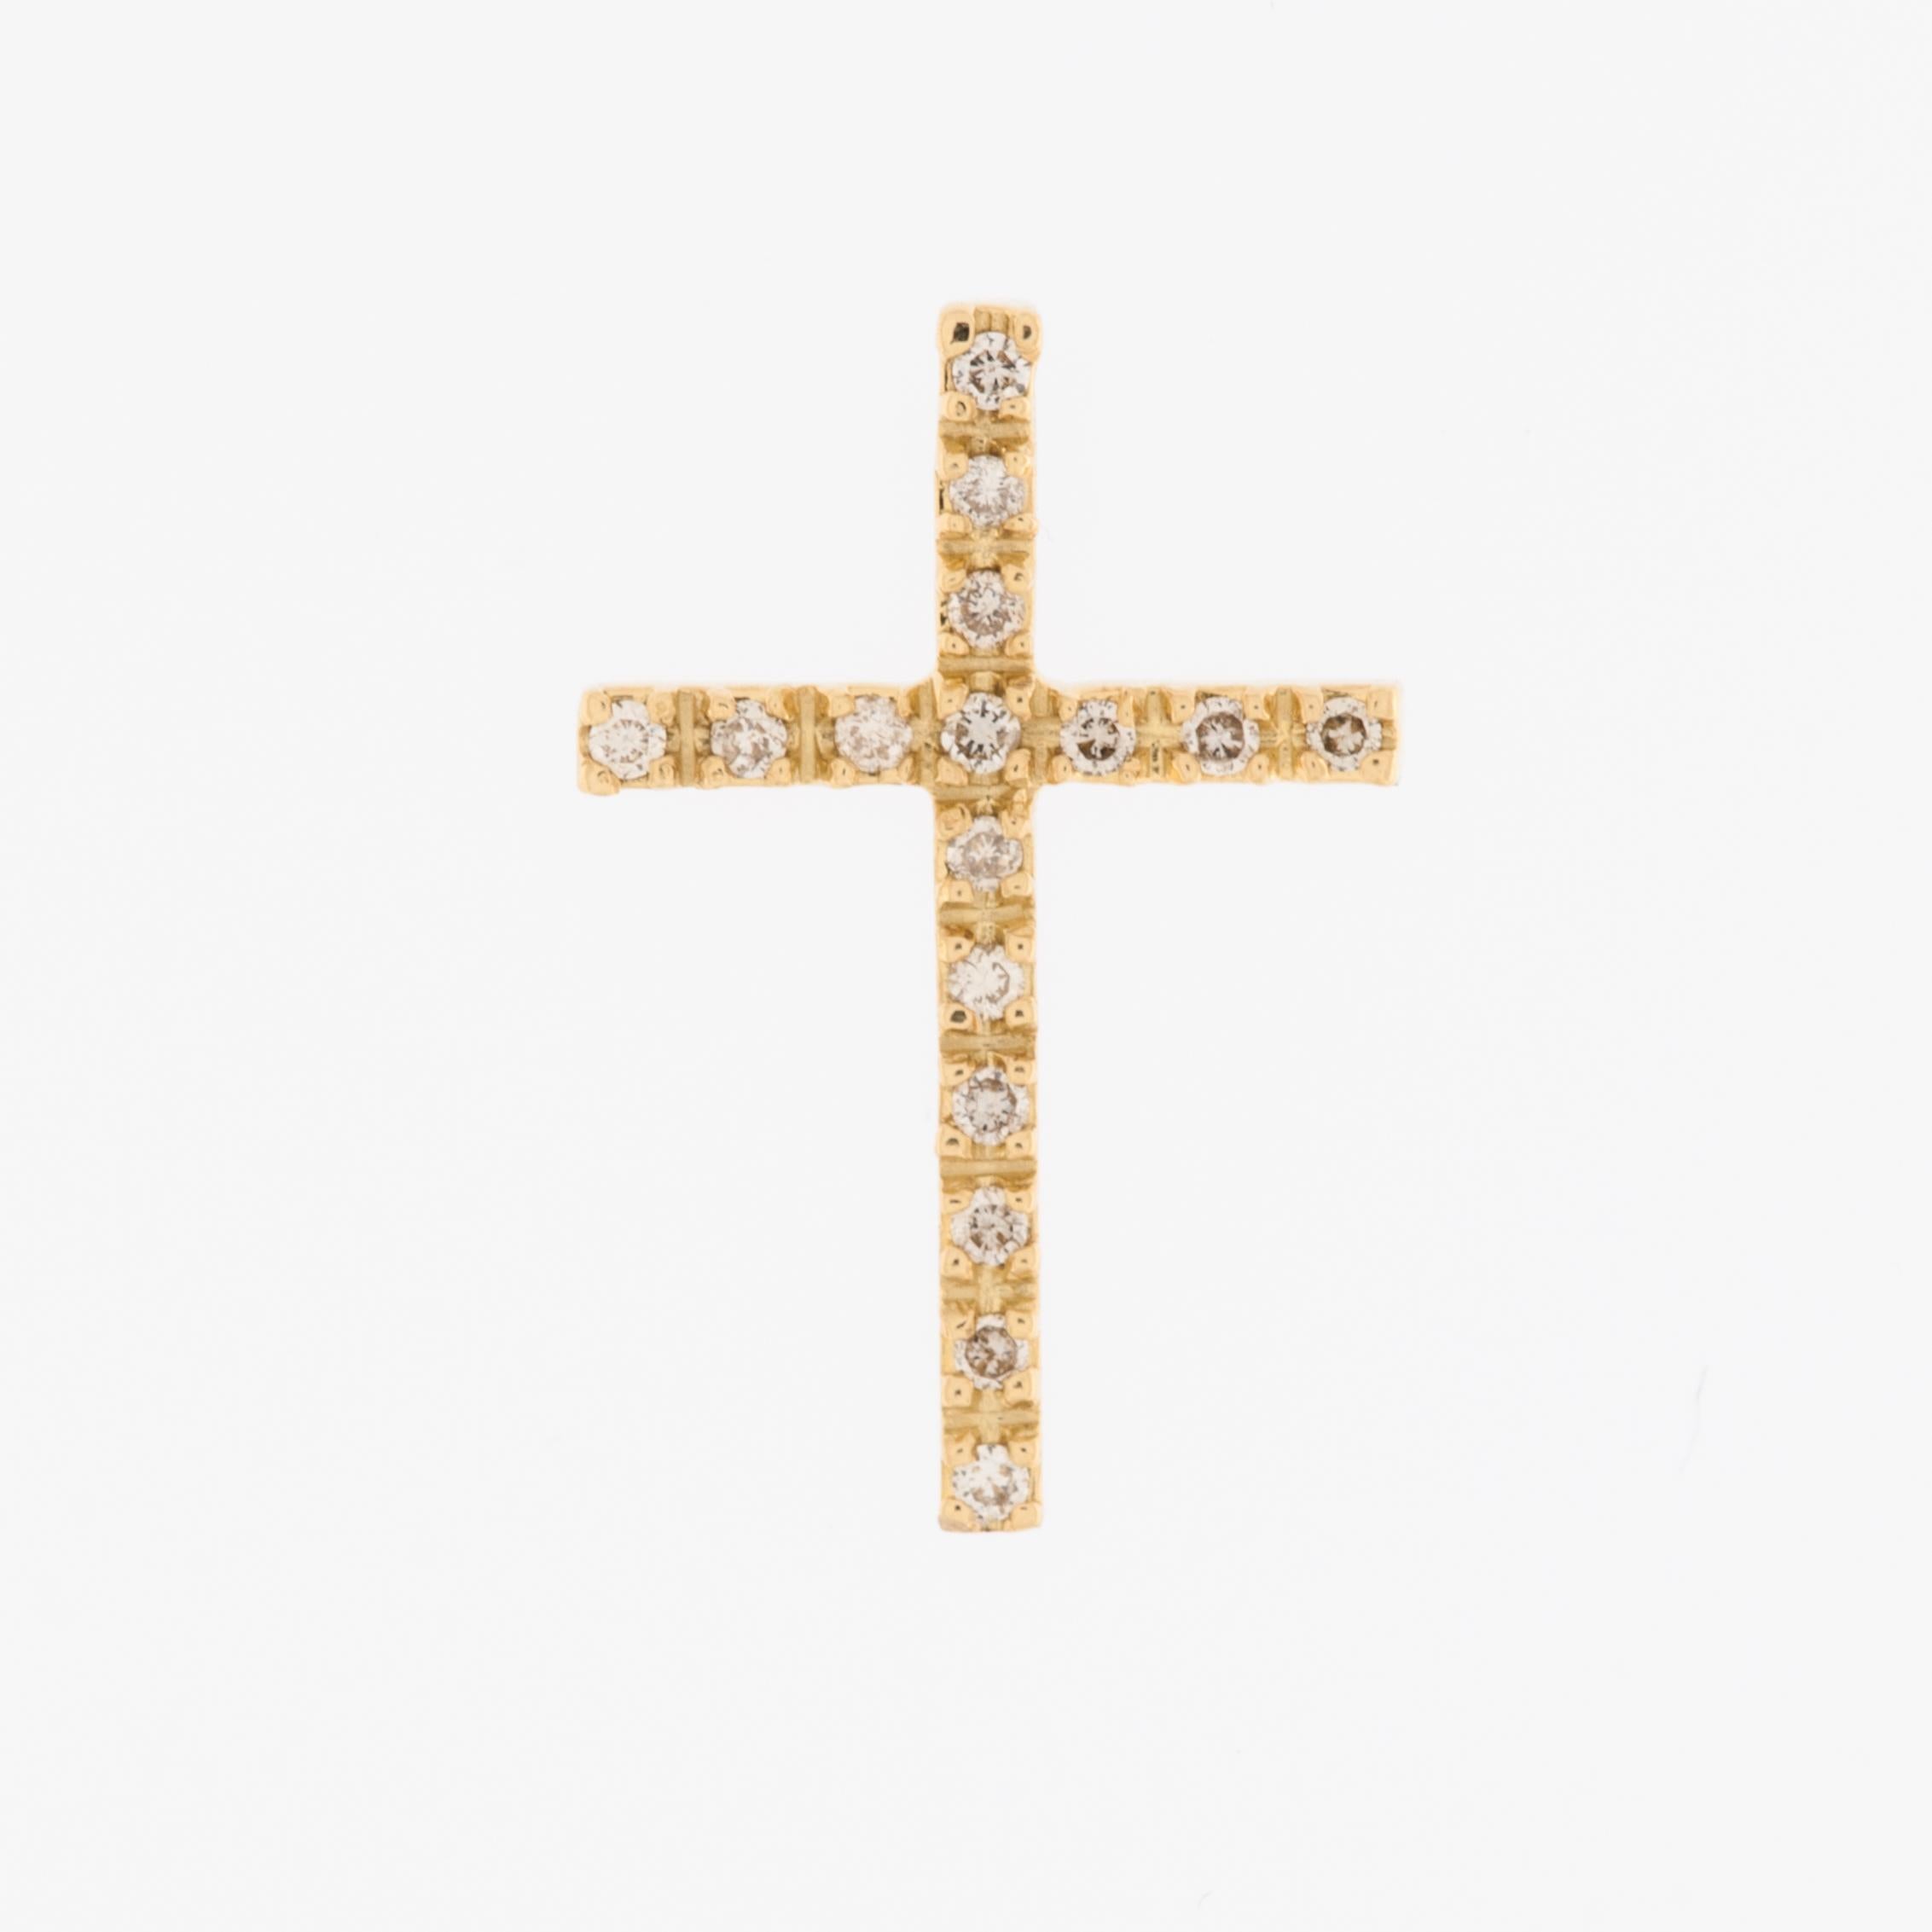 This wonderful cross is crafted from 18-karat yellow gold, known for its lustrous and rich appearance. This high-quality gold is often used in fine jewelry due to its durability and timeless appeal.
The 18kt yellow gold enhances the visual appeal,